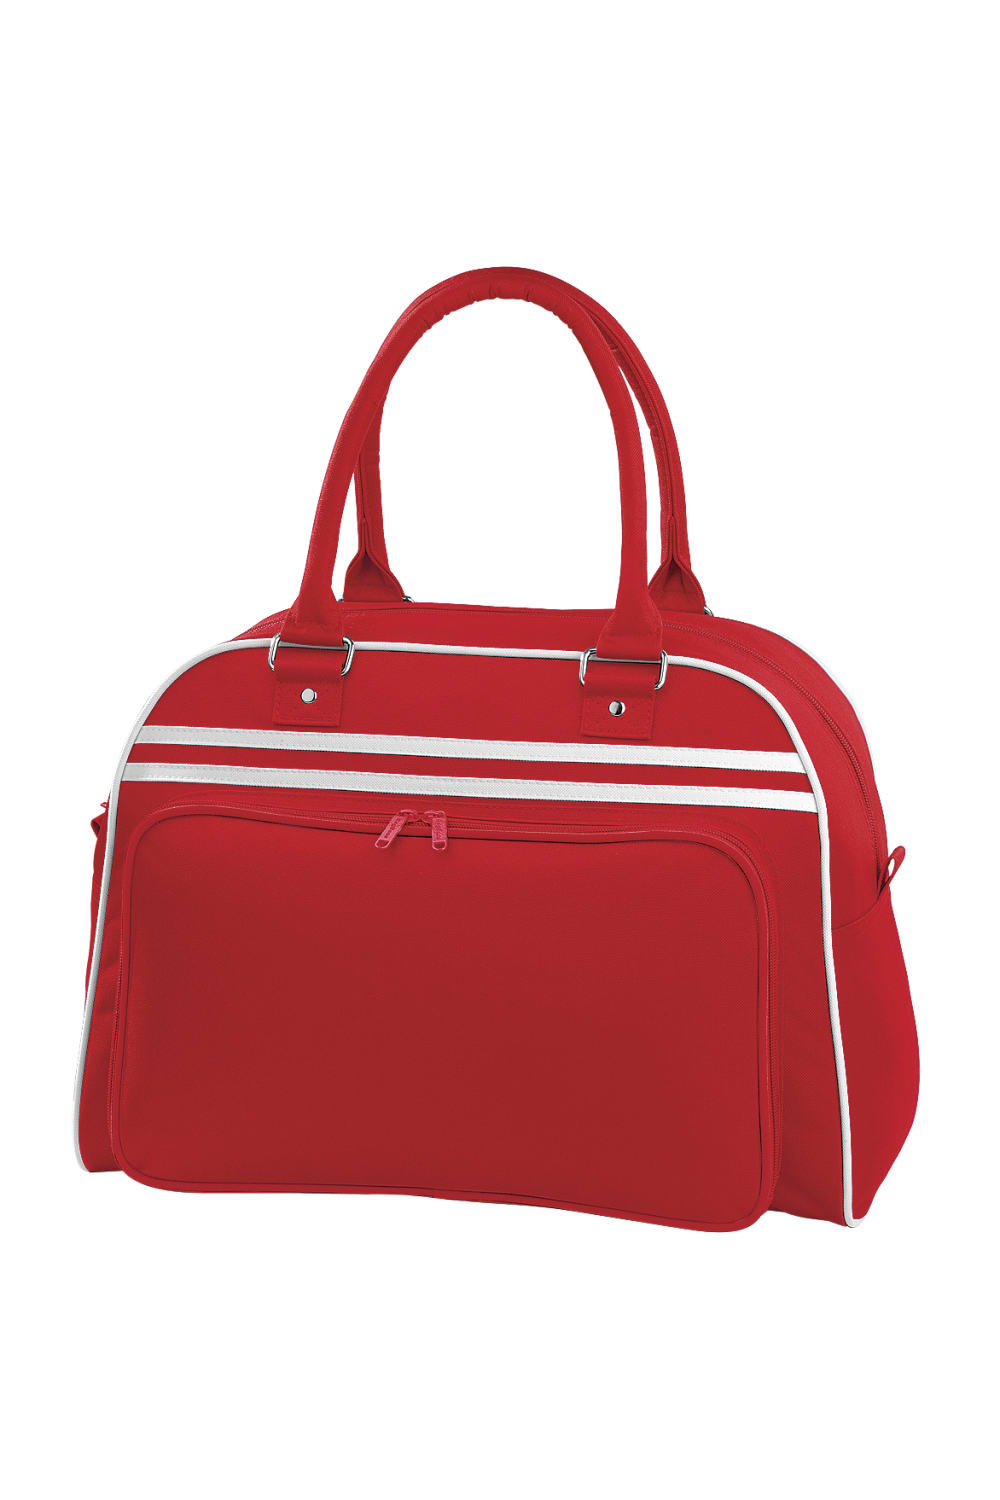 Retro Bowling Bag (6 Gallons) - Classic Red/White